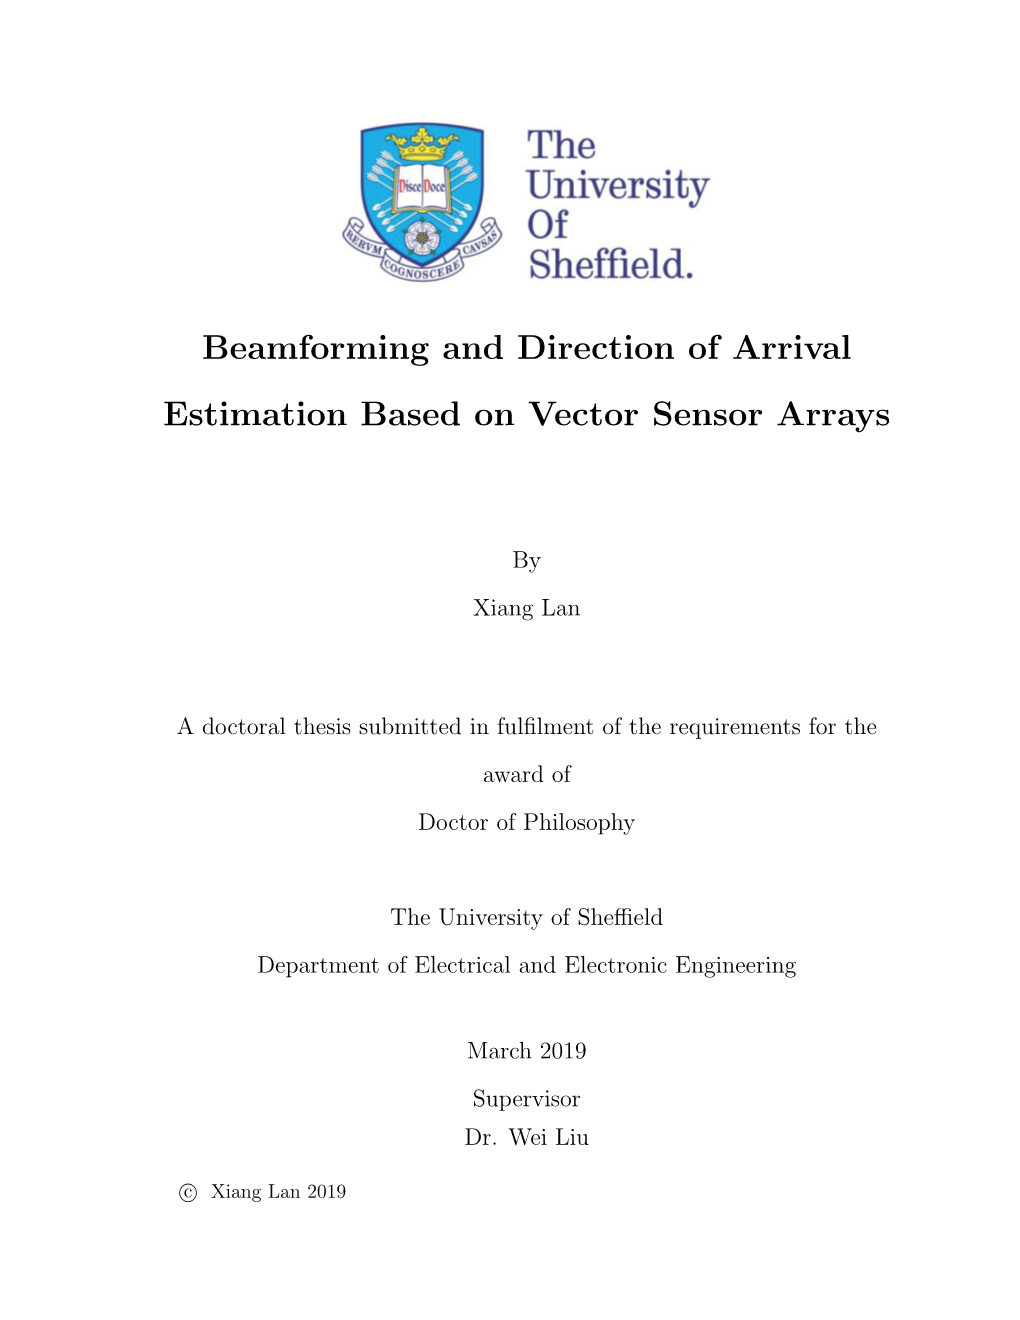 Beamforming and Direction of Arrival Estimation Based on Vector Sensor Arrays